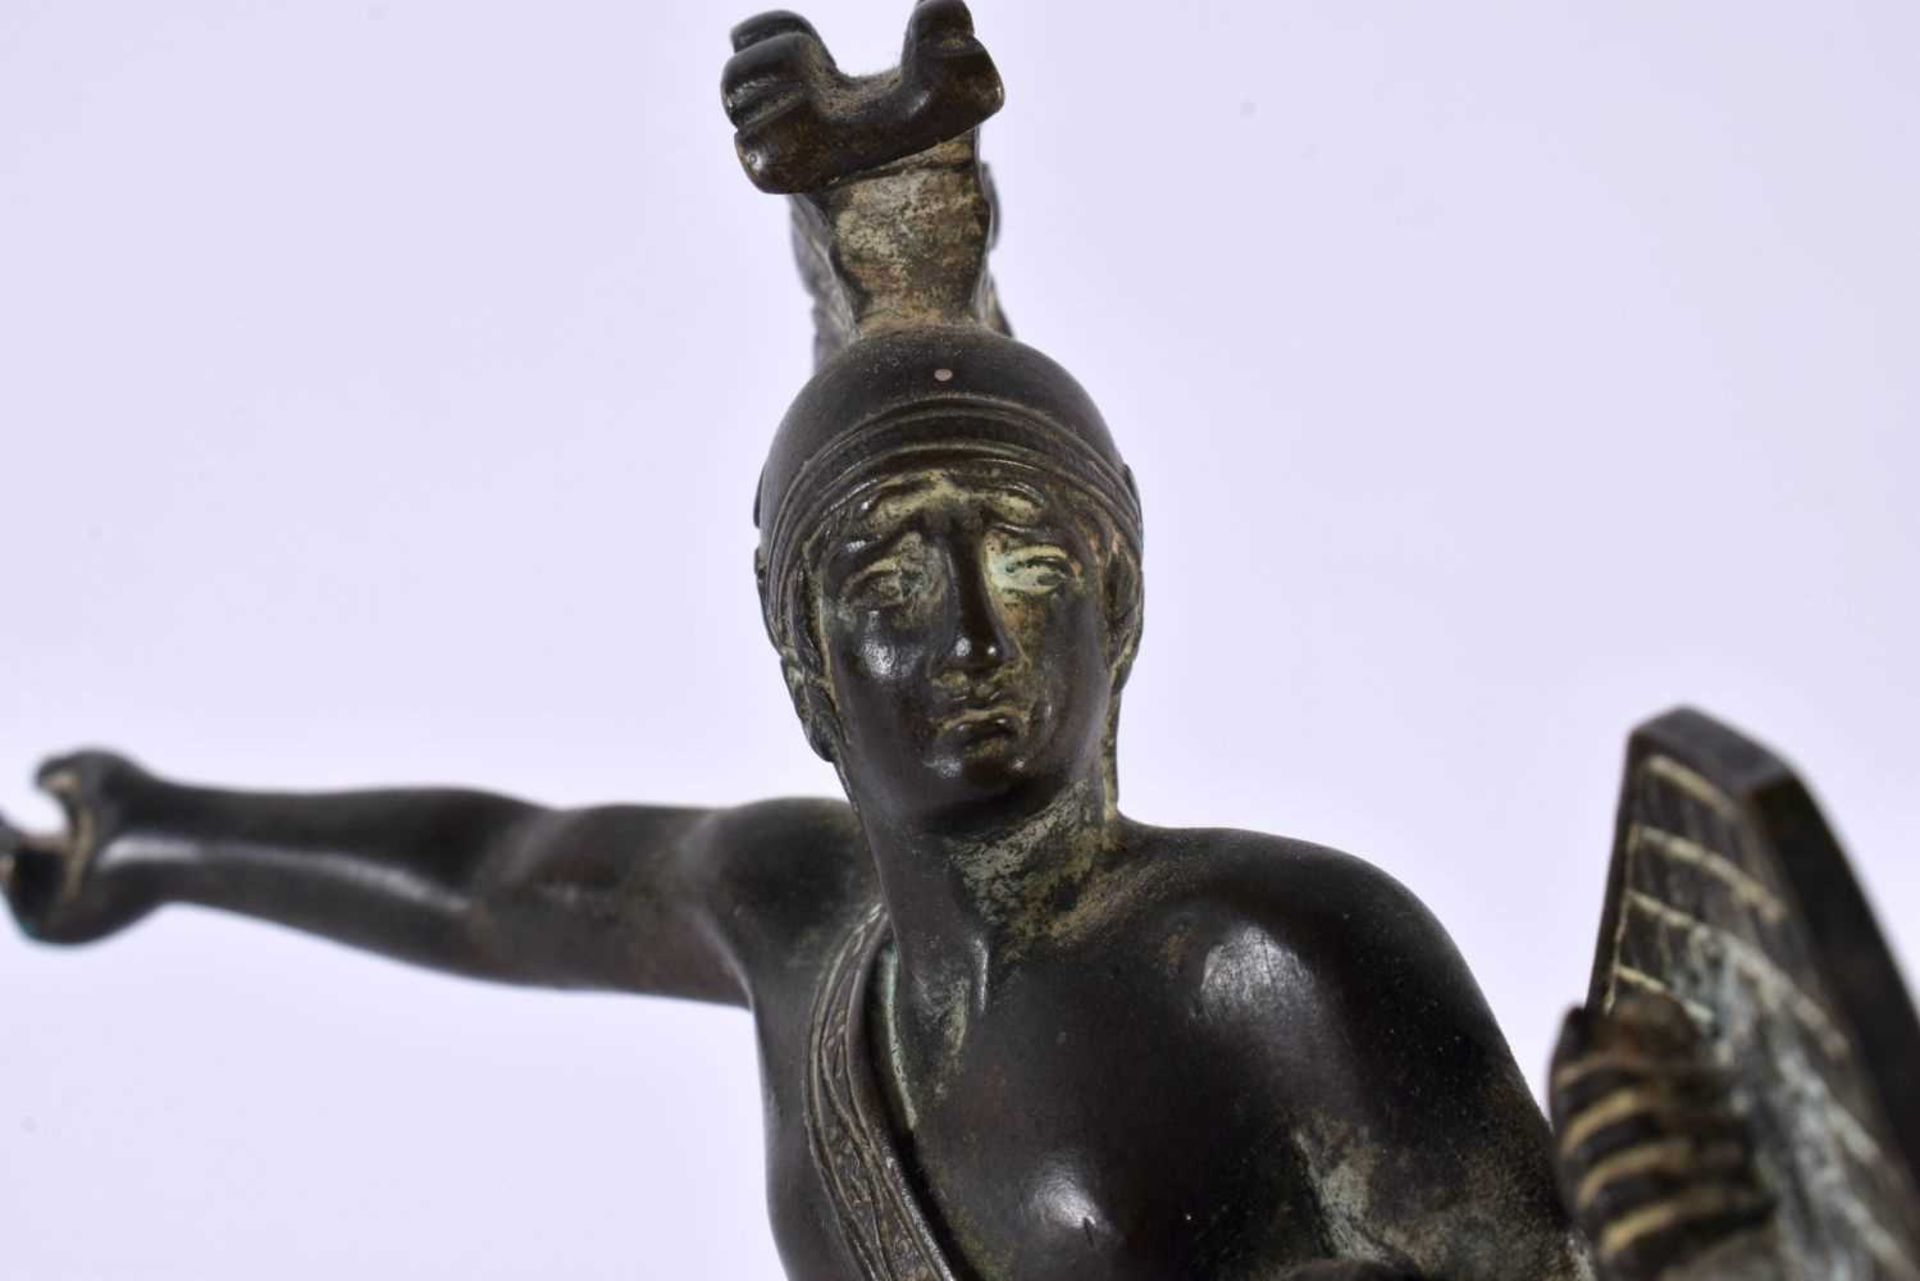 A 19TH CENTURY EUROPEAN GRAND TOUR BRONZE FIGURE OF A GLADIATOR upon a marble base. 18cm x 12 cm. - Image 3 of 5